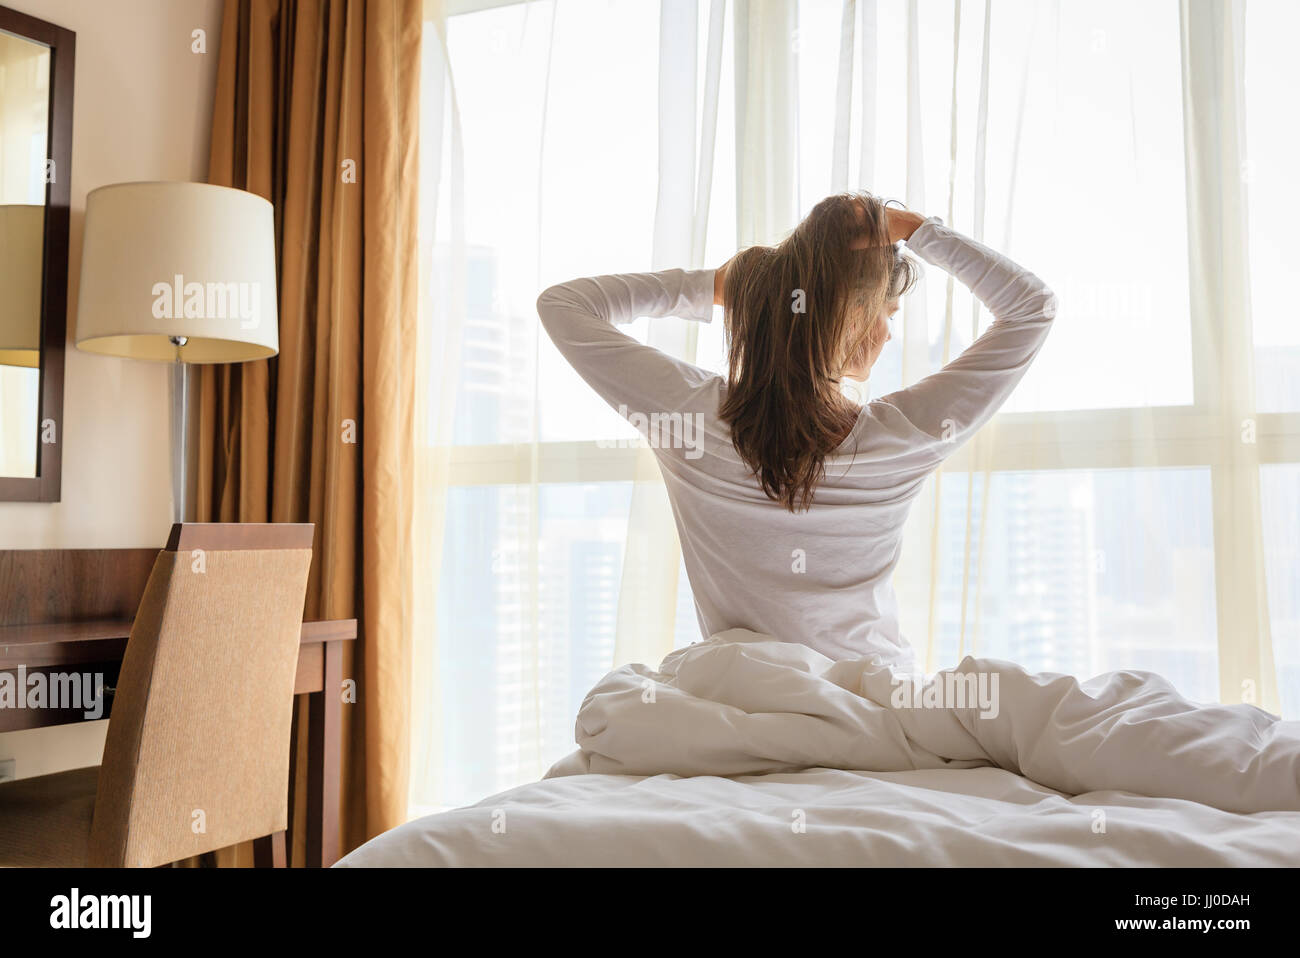 Mature woman is waking up in her bedroom in a hotel/apartment Stock Photo